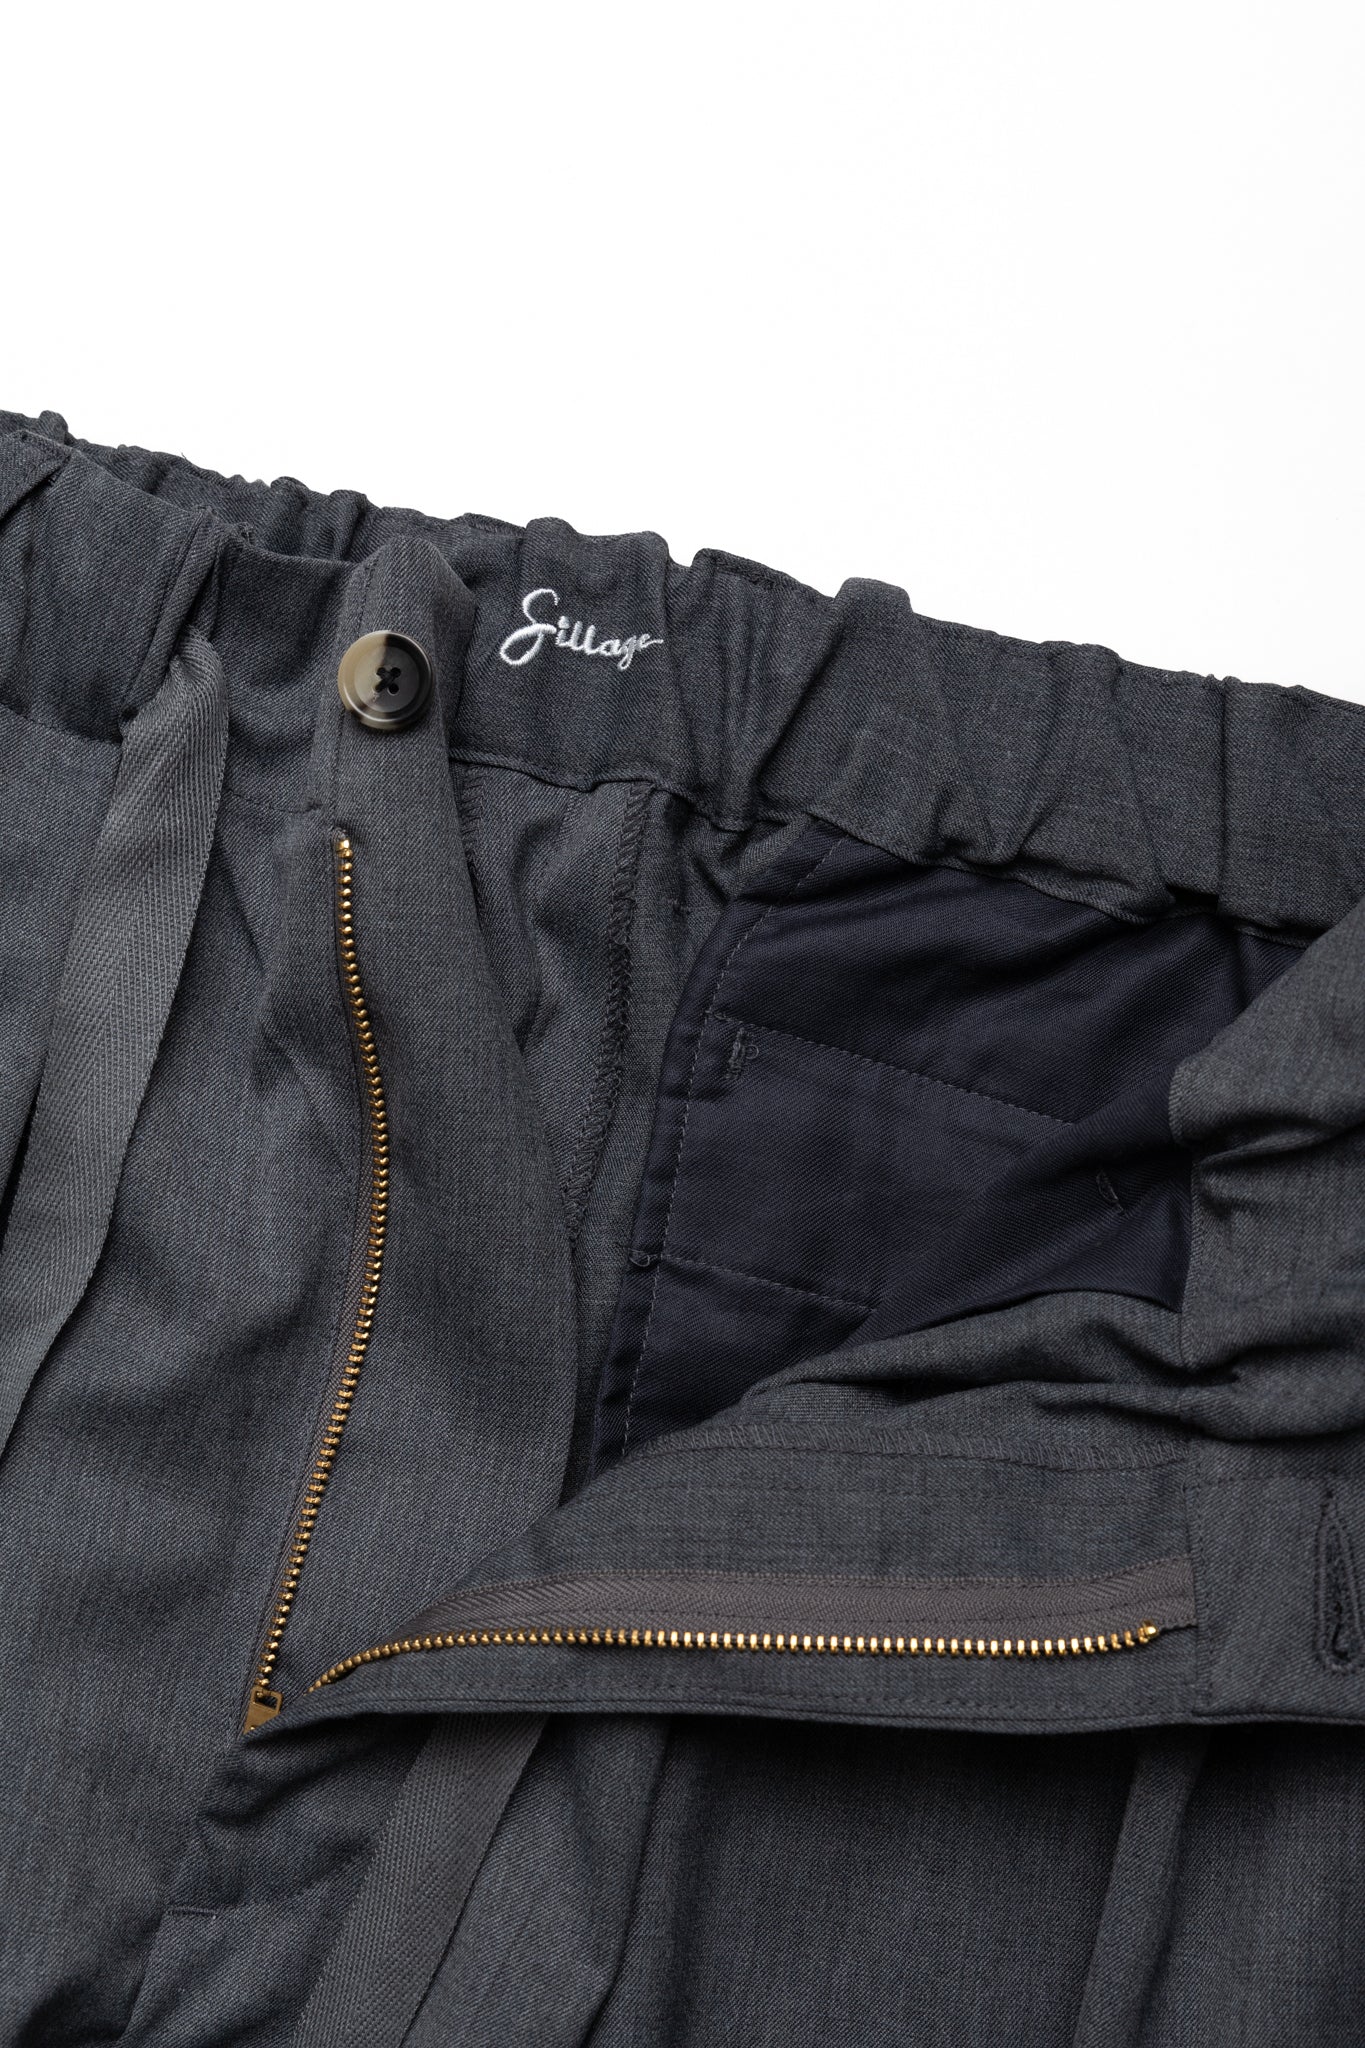 Baggy Trousers Twill Grey